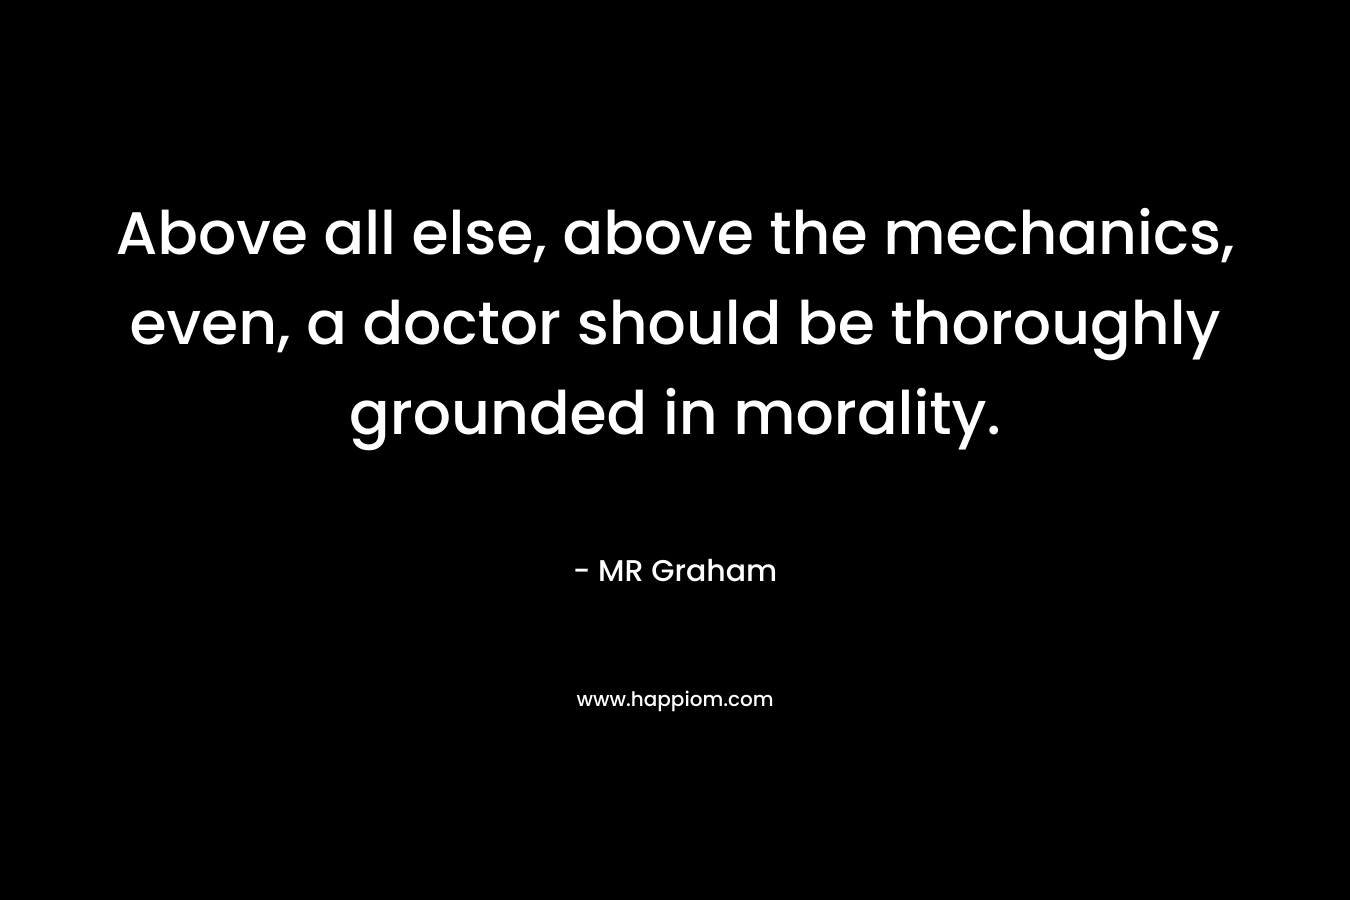 Above all else, above the mechanics, even, a doctor should be thoroughly grounded in morality.